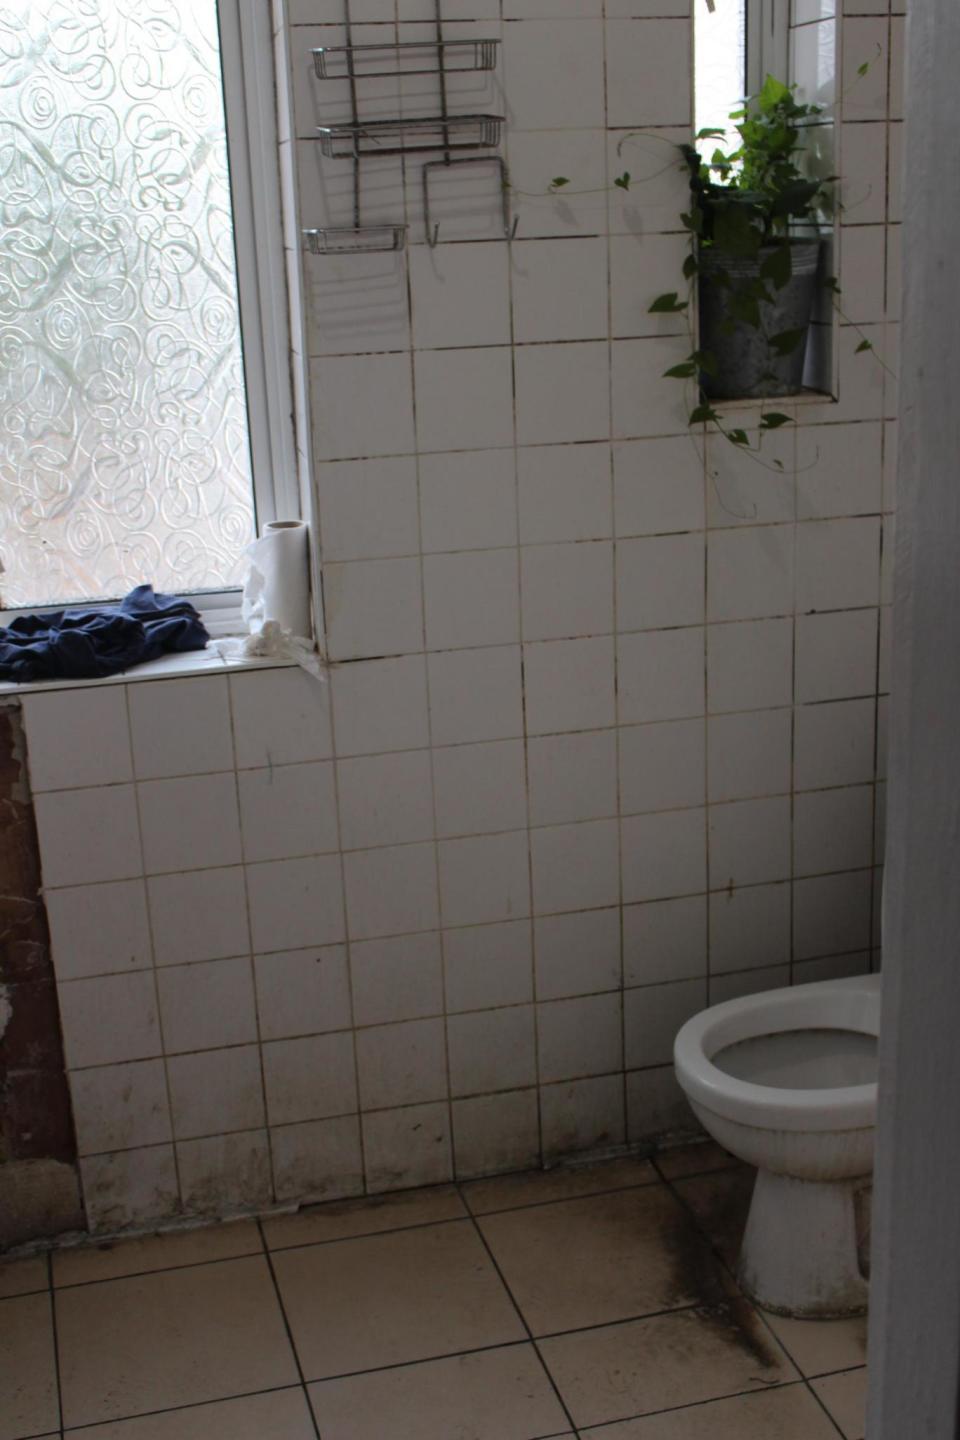 The disgusting bathroom used by the 16 men found in the flat (Brent Council)